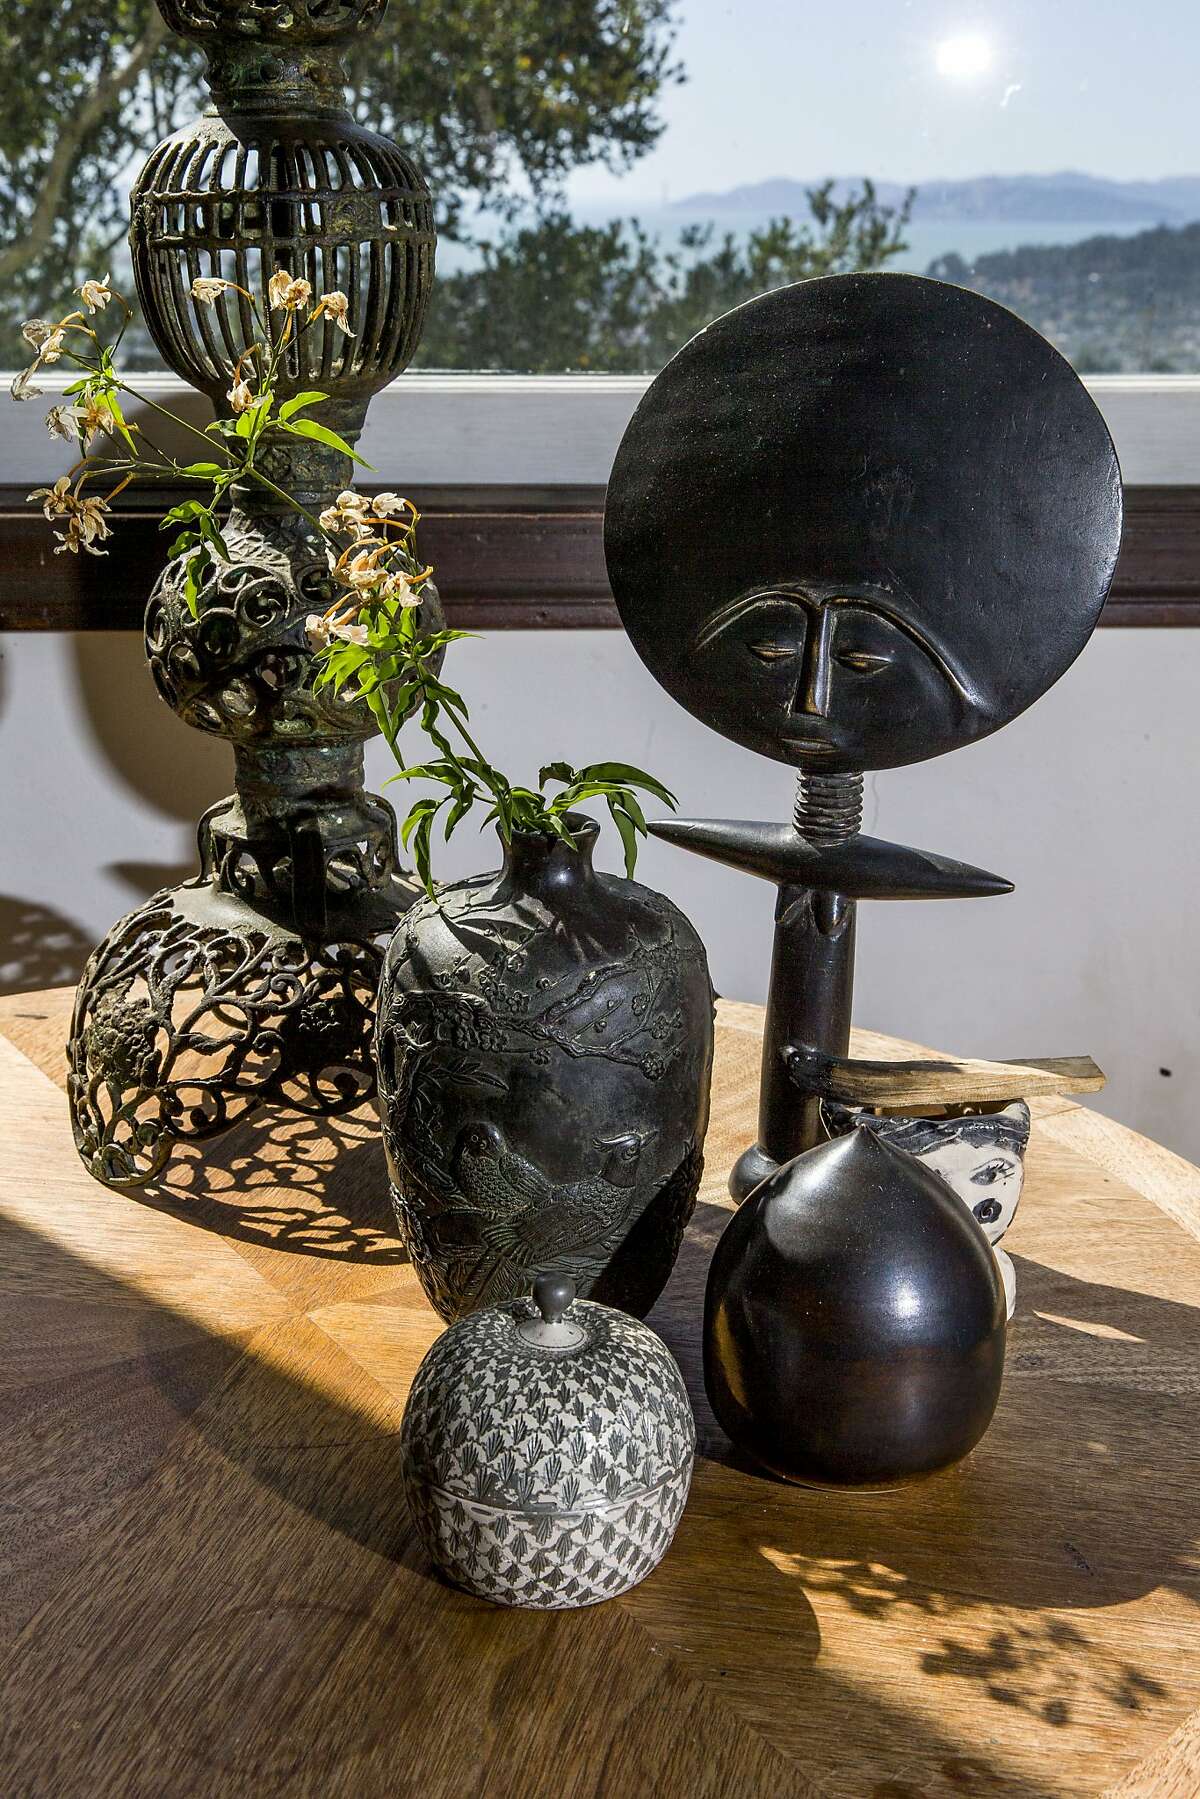 Len Carella ceramics as well as a piece her daughter made and other trinkets at the home of fashion designer Erica Tanov on Tuesday, Oct. 3, 2017, in Berkeley, Calif.